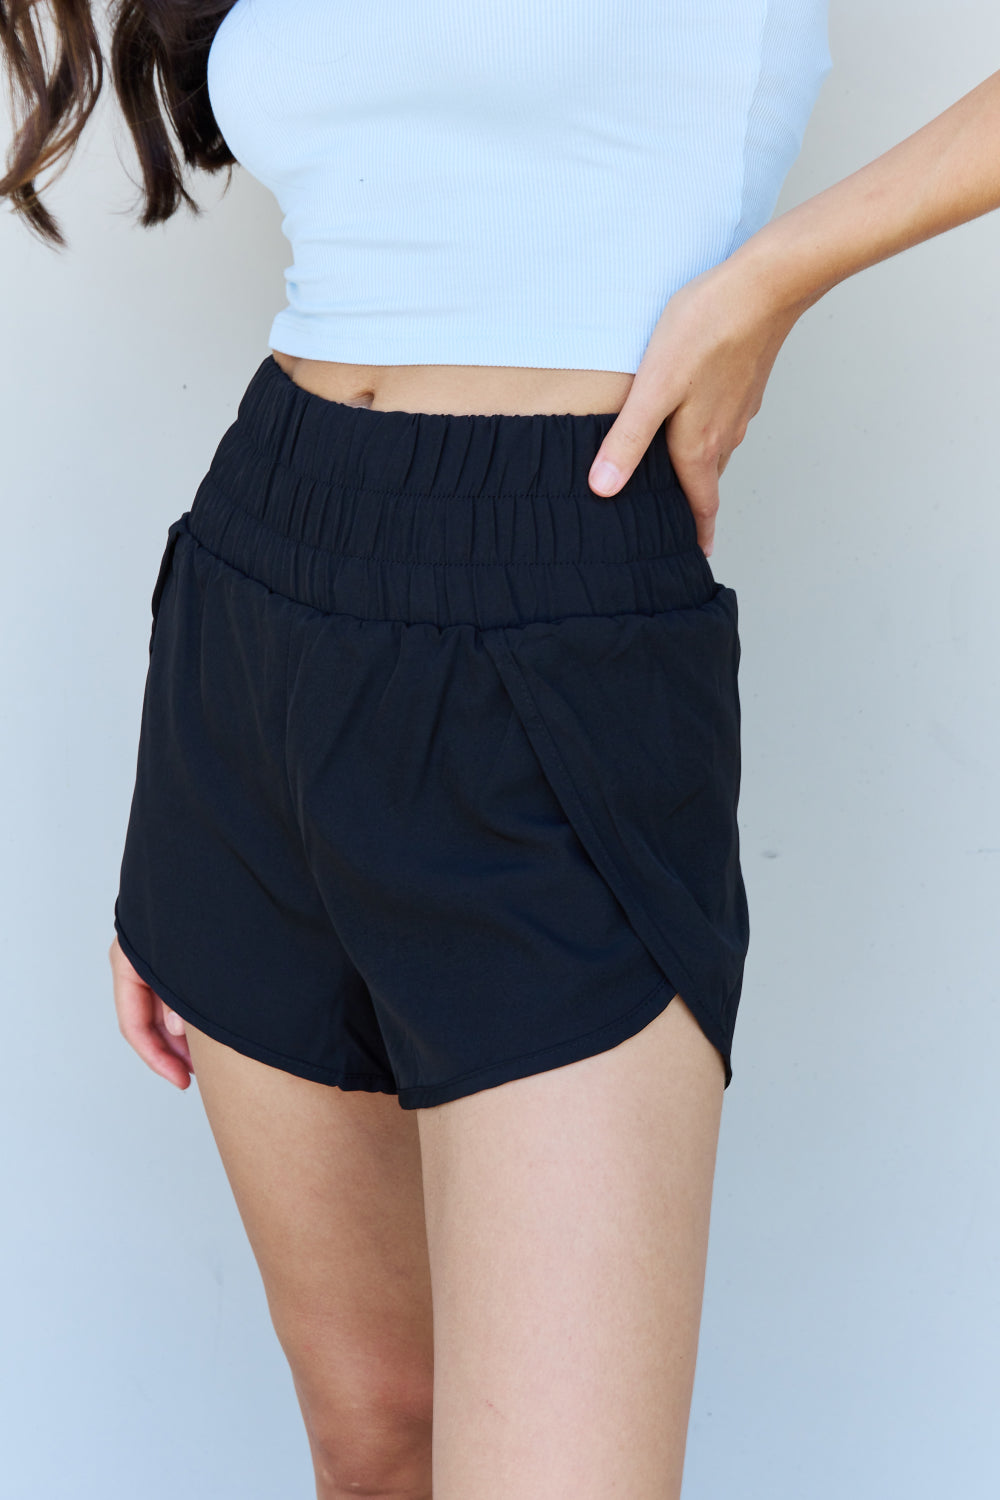 Ninexis Stay Active High Waistband Active Shorts in Black - Tigbul's Fashion